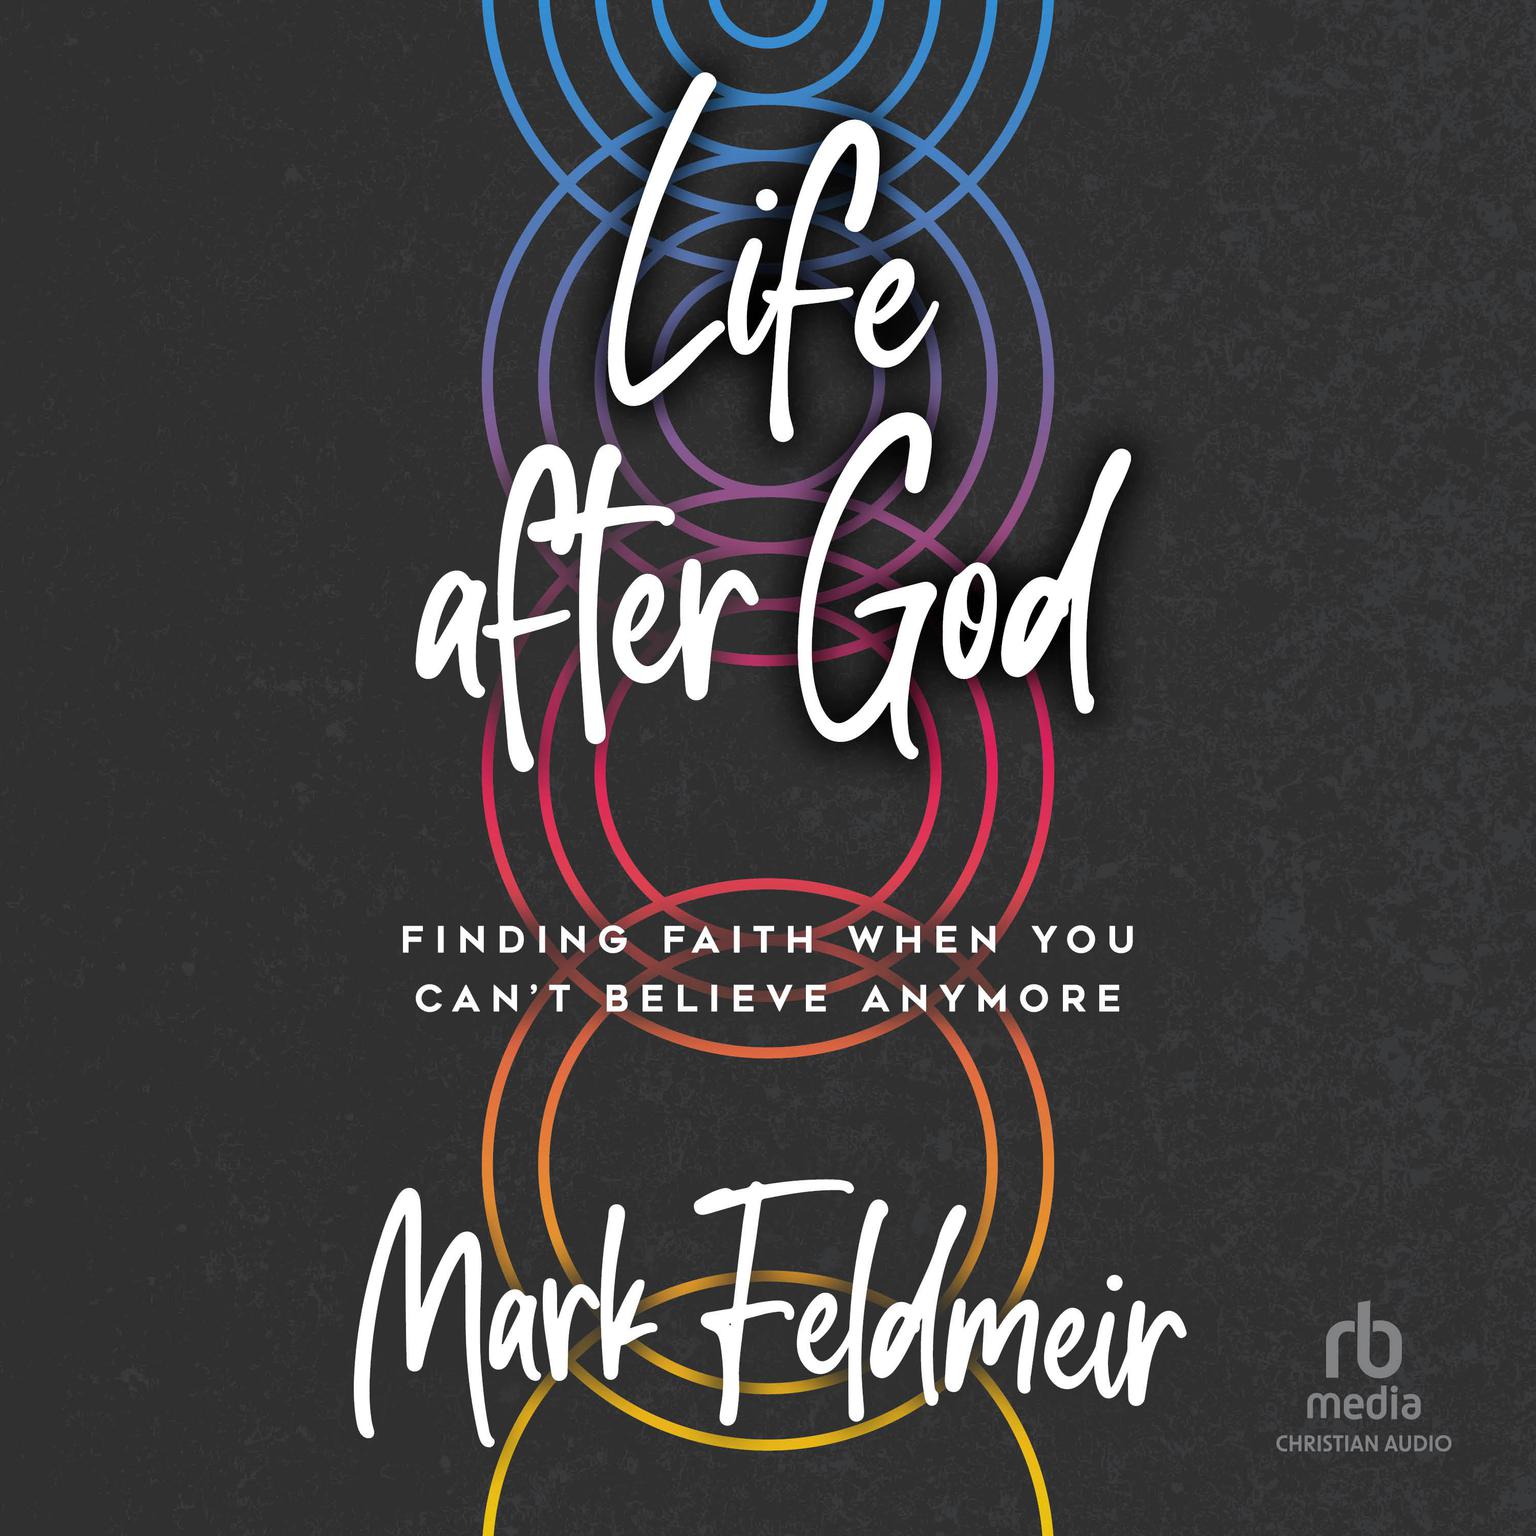 Life after God: Finding Faith When You Cant Believe Anymore Audiobook, by Mark Feldmeir